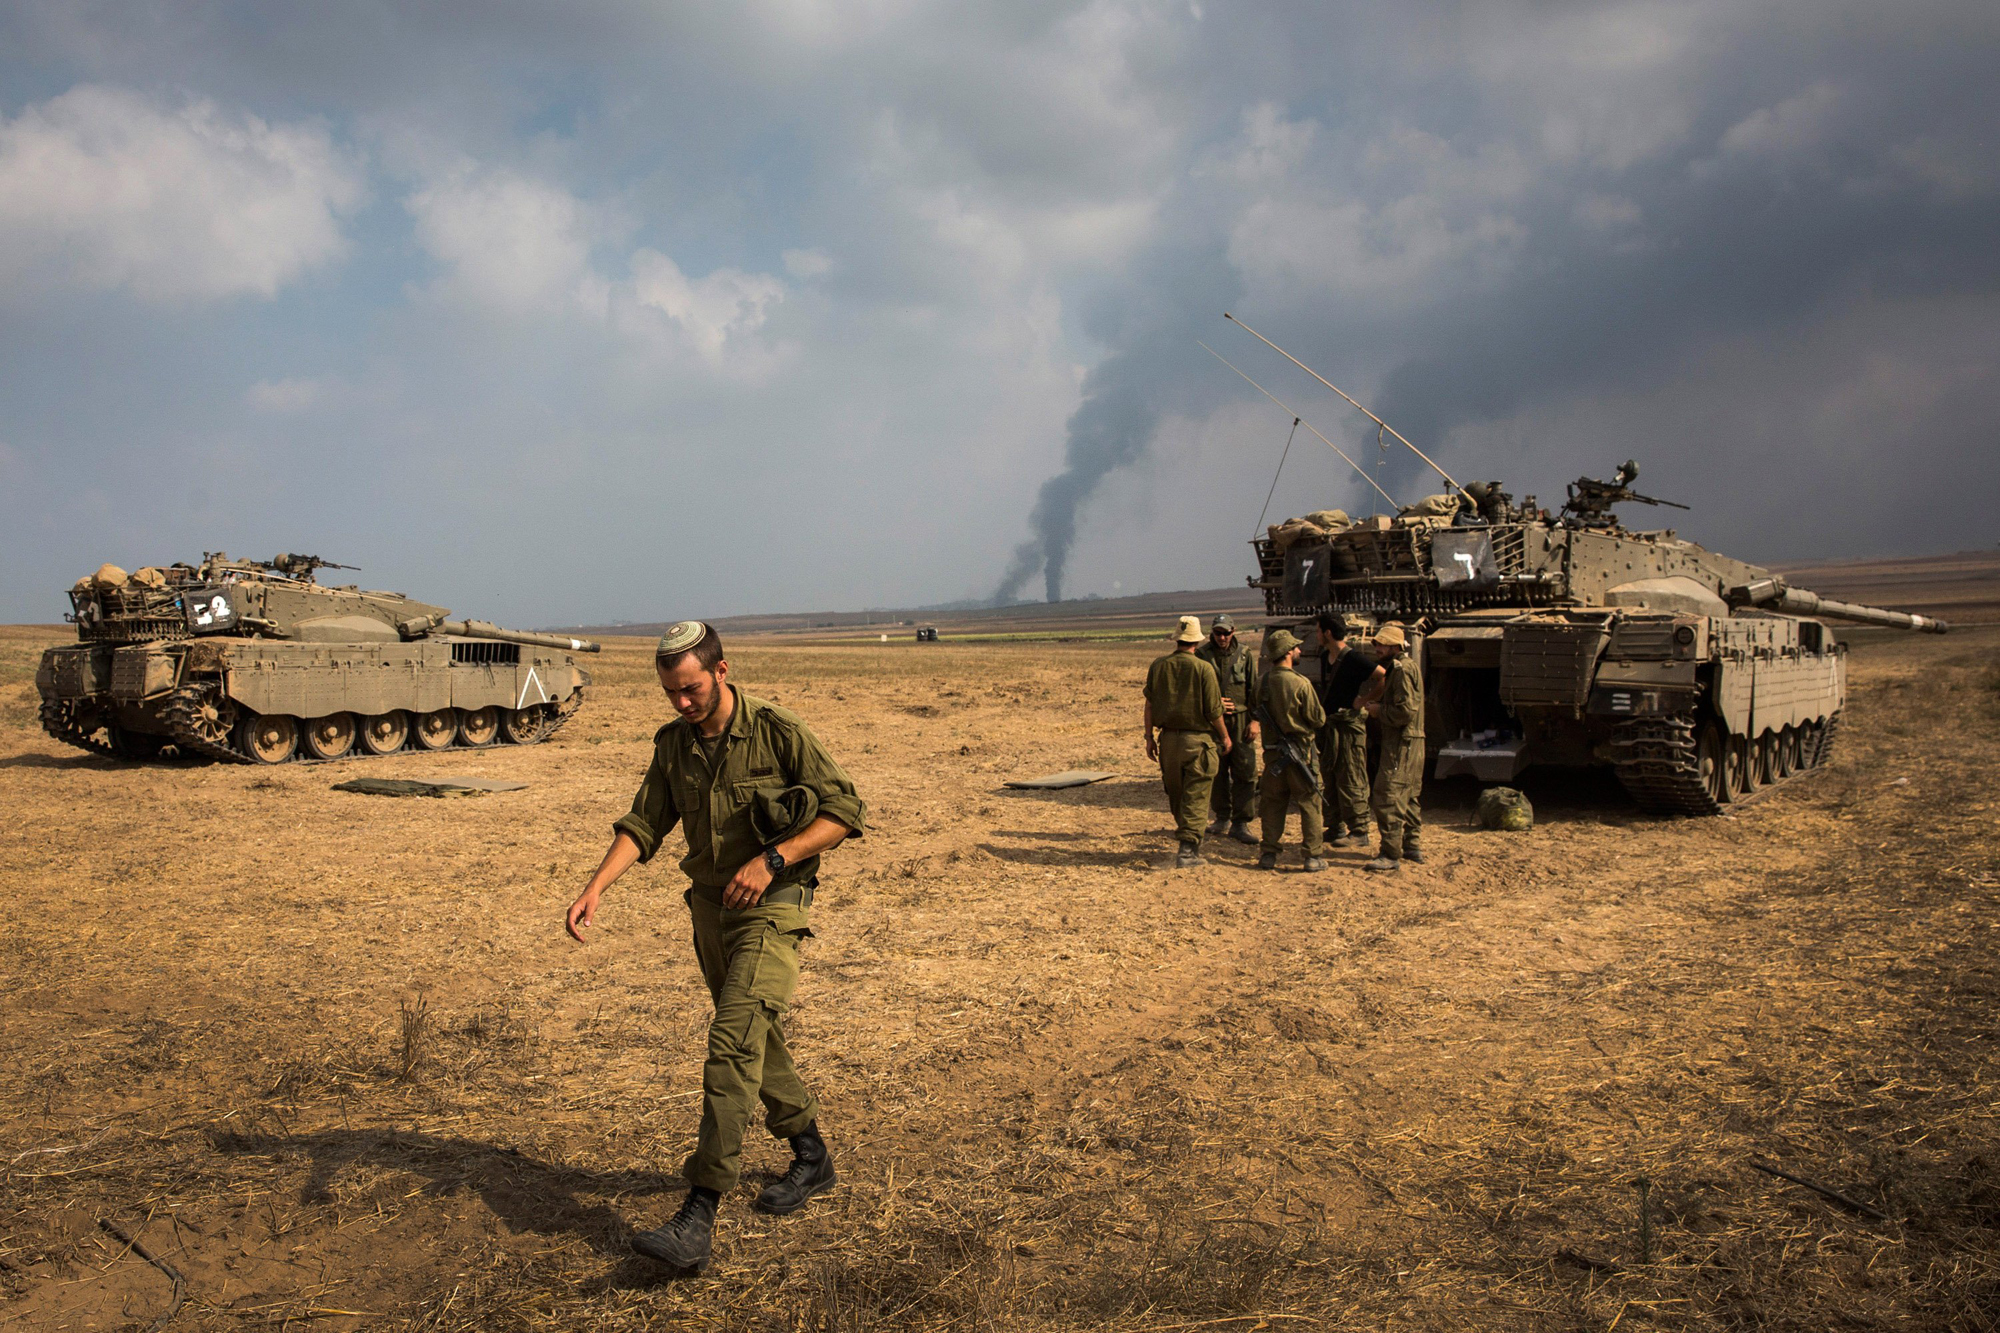 Israeli soldiers stand near their tank while smoke due to airstrikes and shelling rises from Gaza on July 22, 2014 near Sderot, Israel.